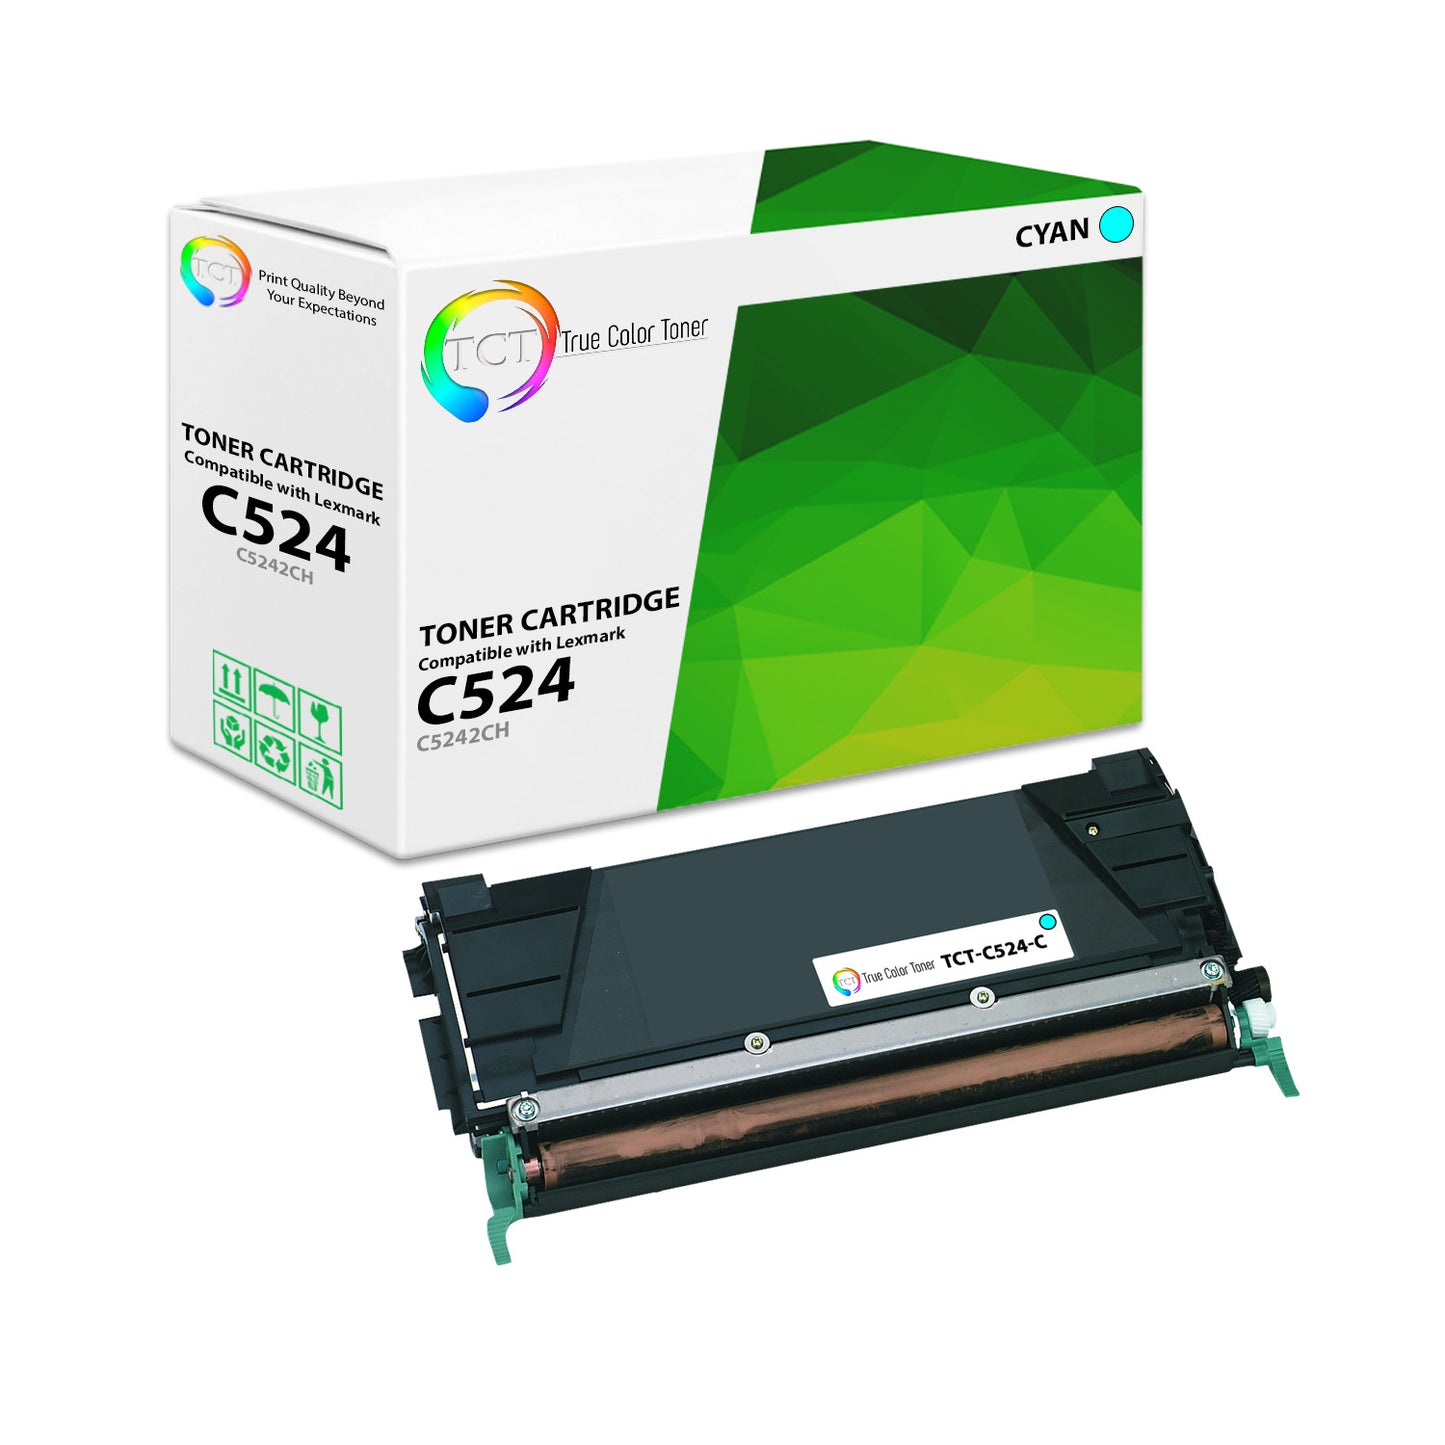 TCT Remanufactured High Yield Toner Cartridge Replacement for the Lexmark C524 Series - 1 Pack Cyan